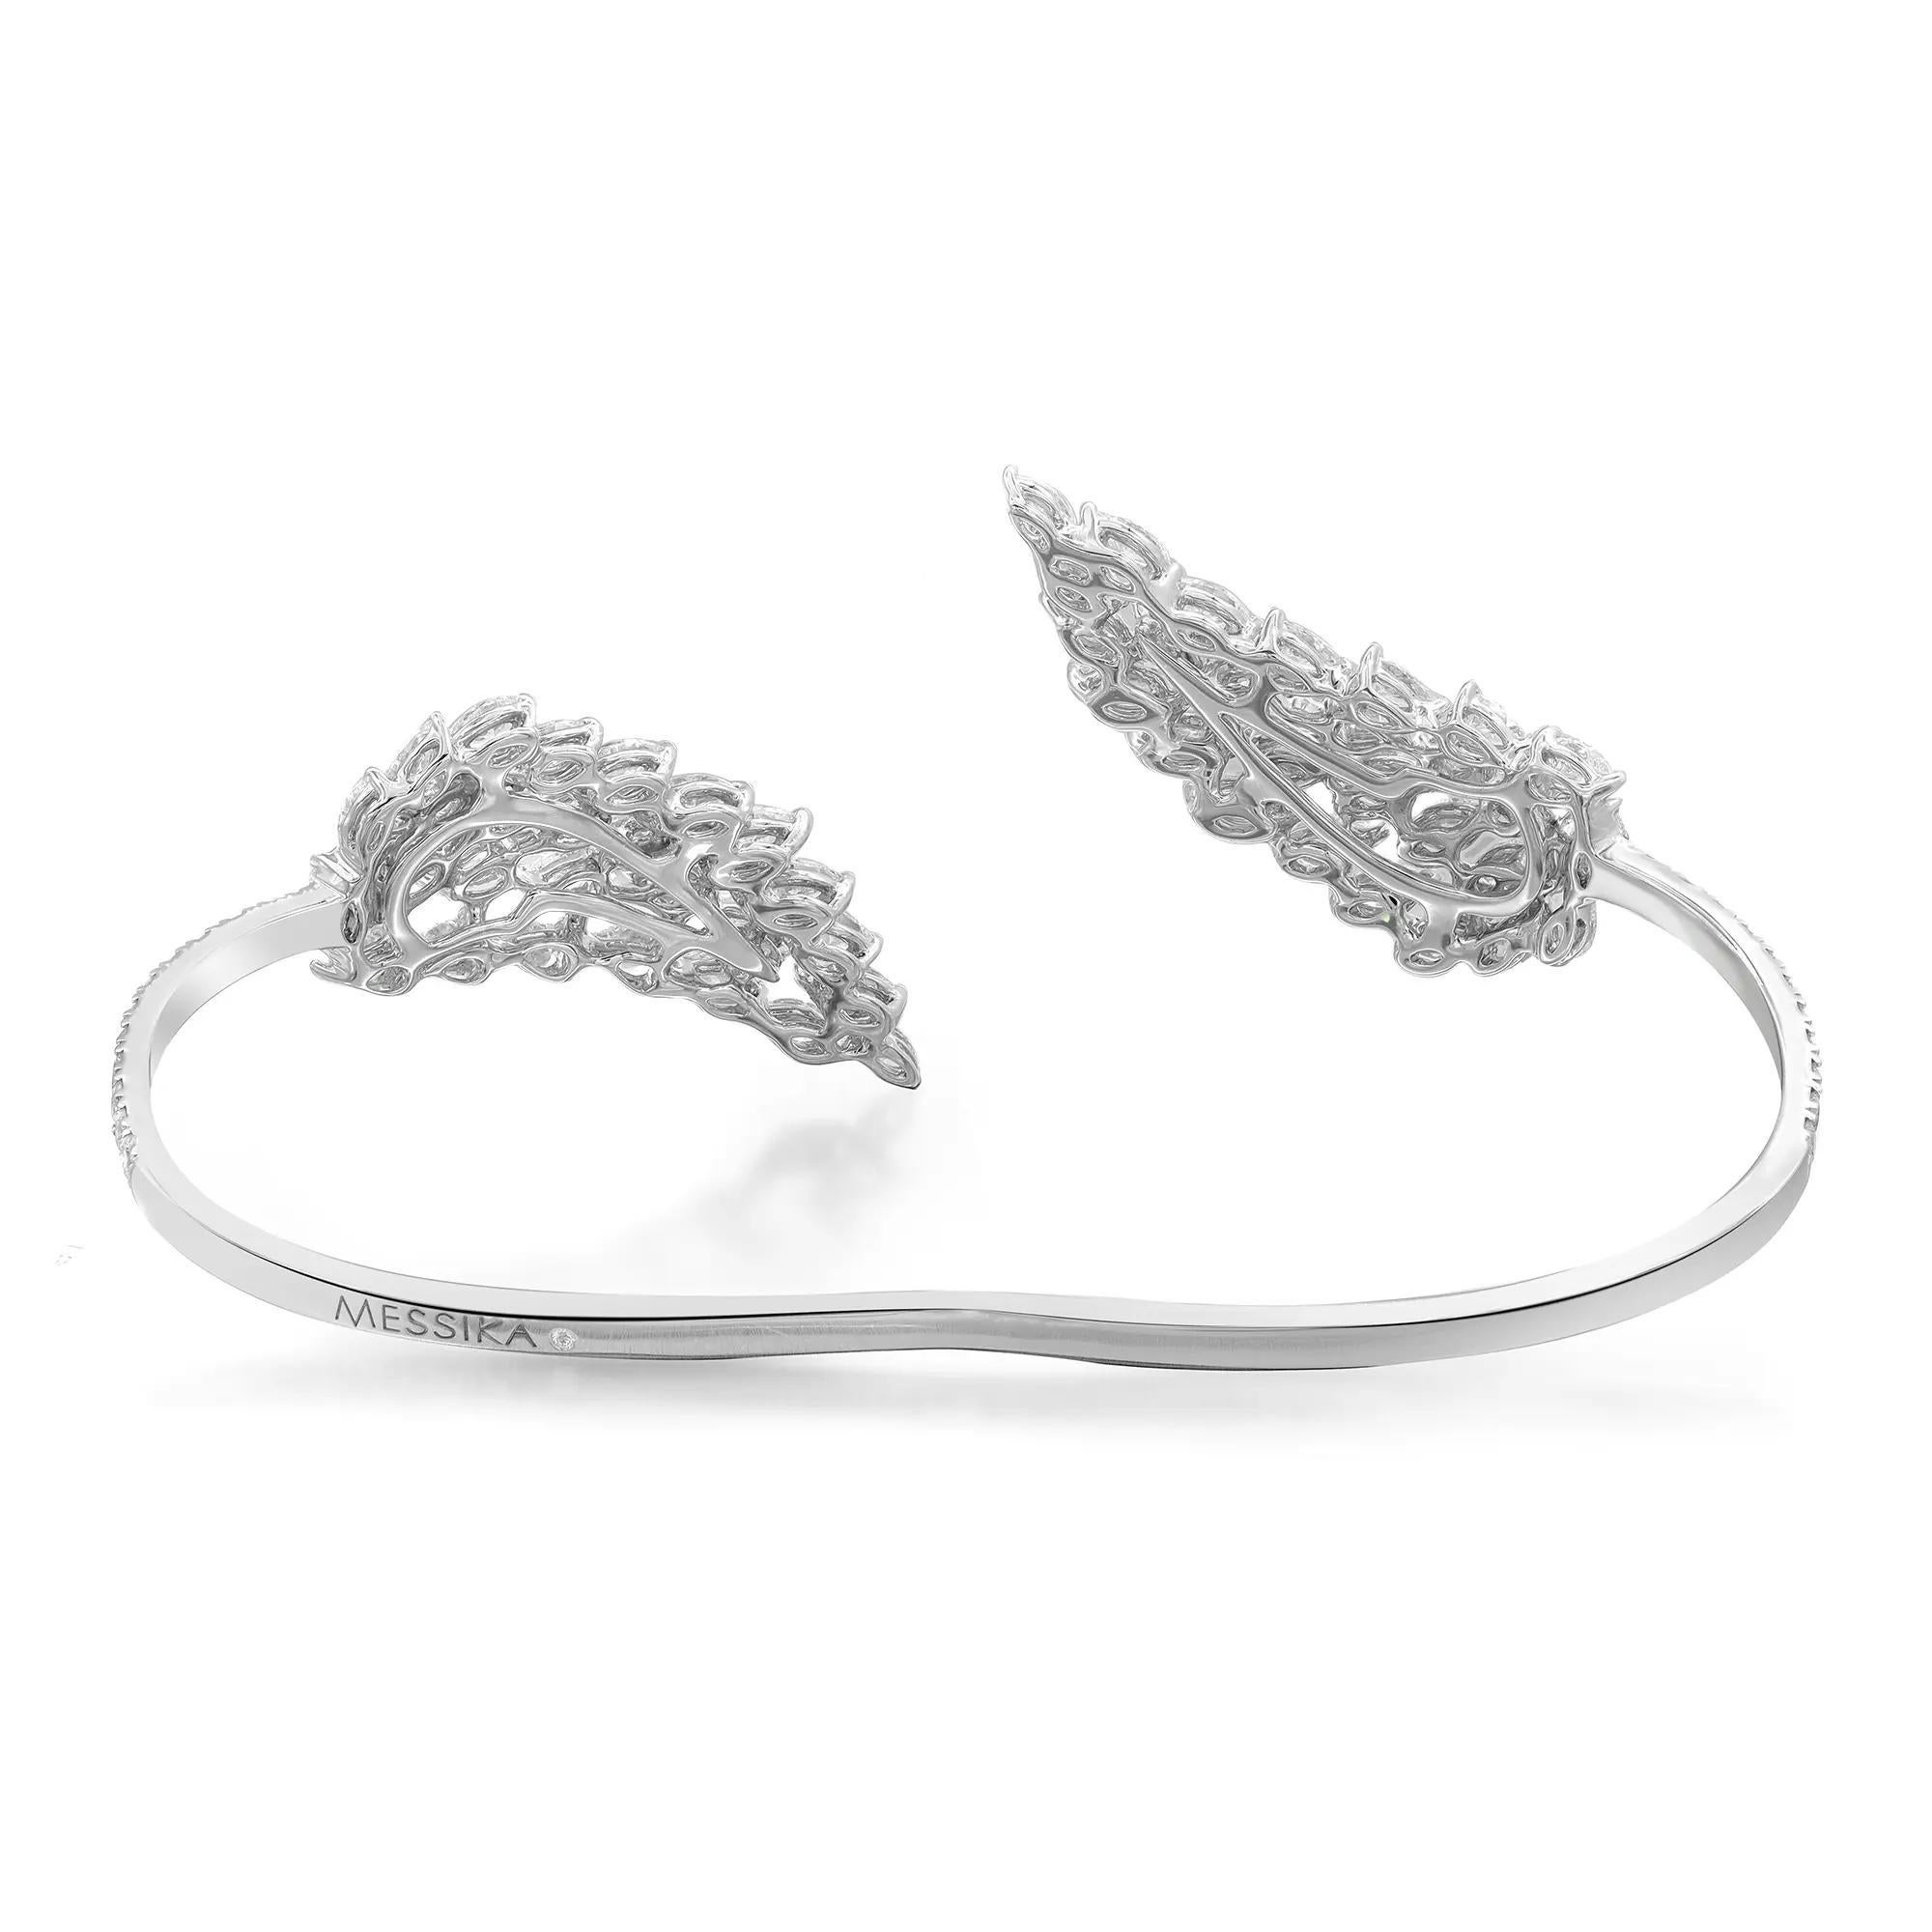 This gorgeous Messika Angel Double diamond bracelet exudes sophistication. Stunningly crafted in lustrous 18K white gold. It features wing-shaped tips that glisten with prong set sparkling marquise and pear cut diamonds with round brilliant cut